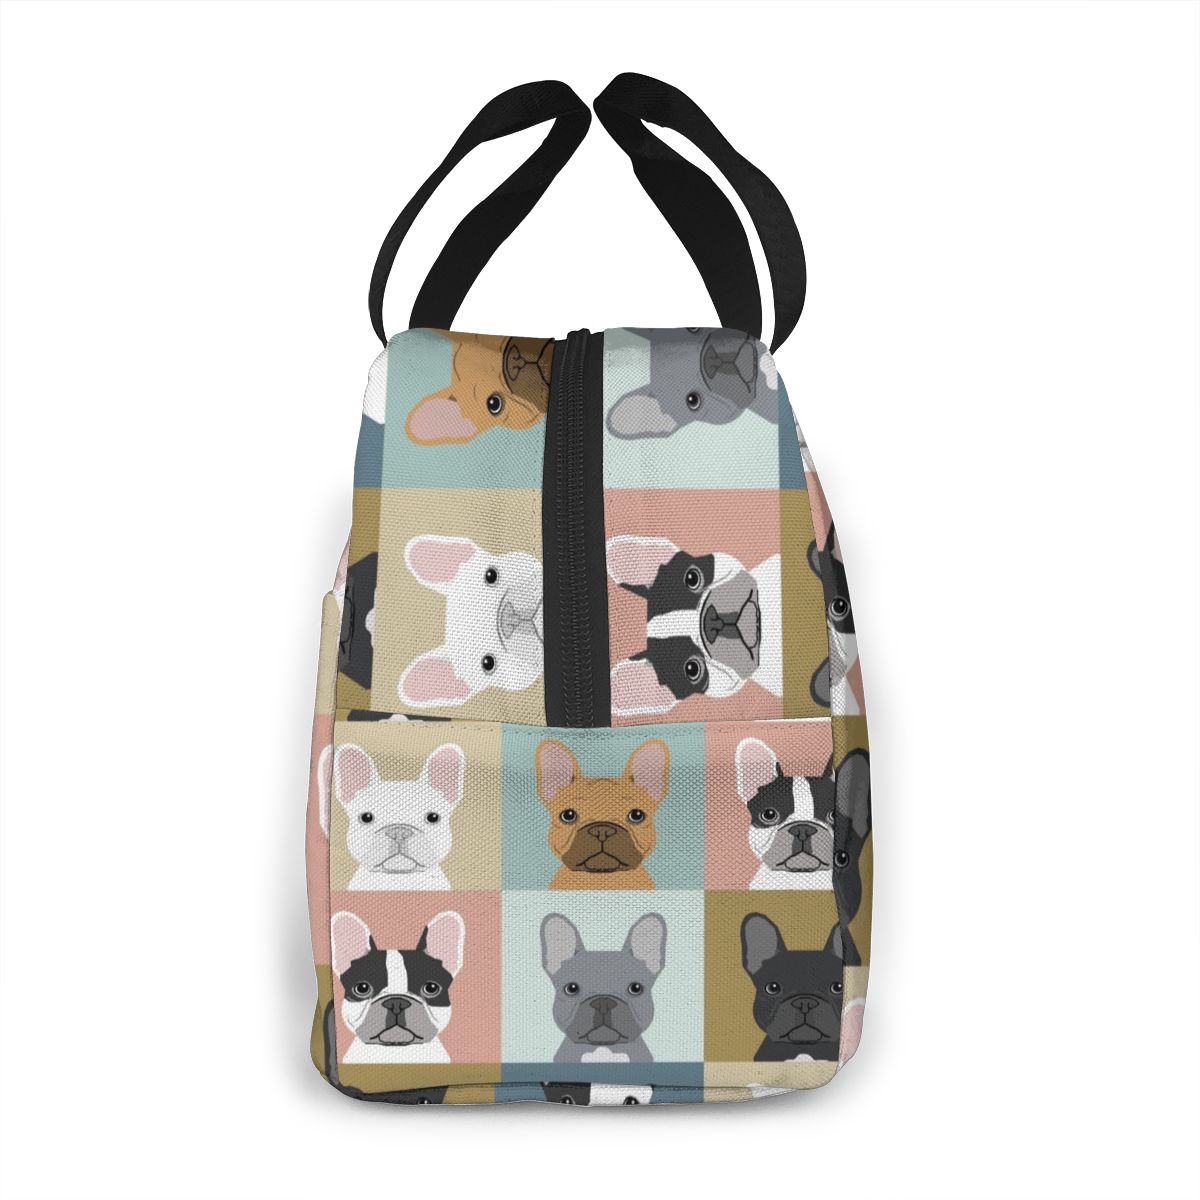 https://cdn.shopify.com/s/files/1/0033/4754/6157/products/some-of-the-french-bulldogs-i-love-insulated-lunch-bag-with-exterior-pocket-3.jpg?v=1679127393